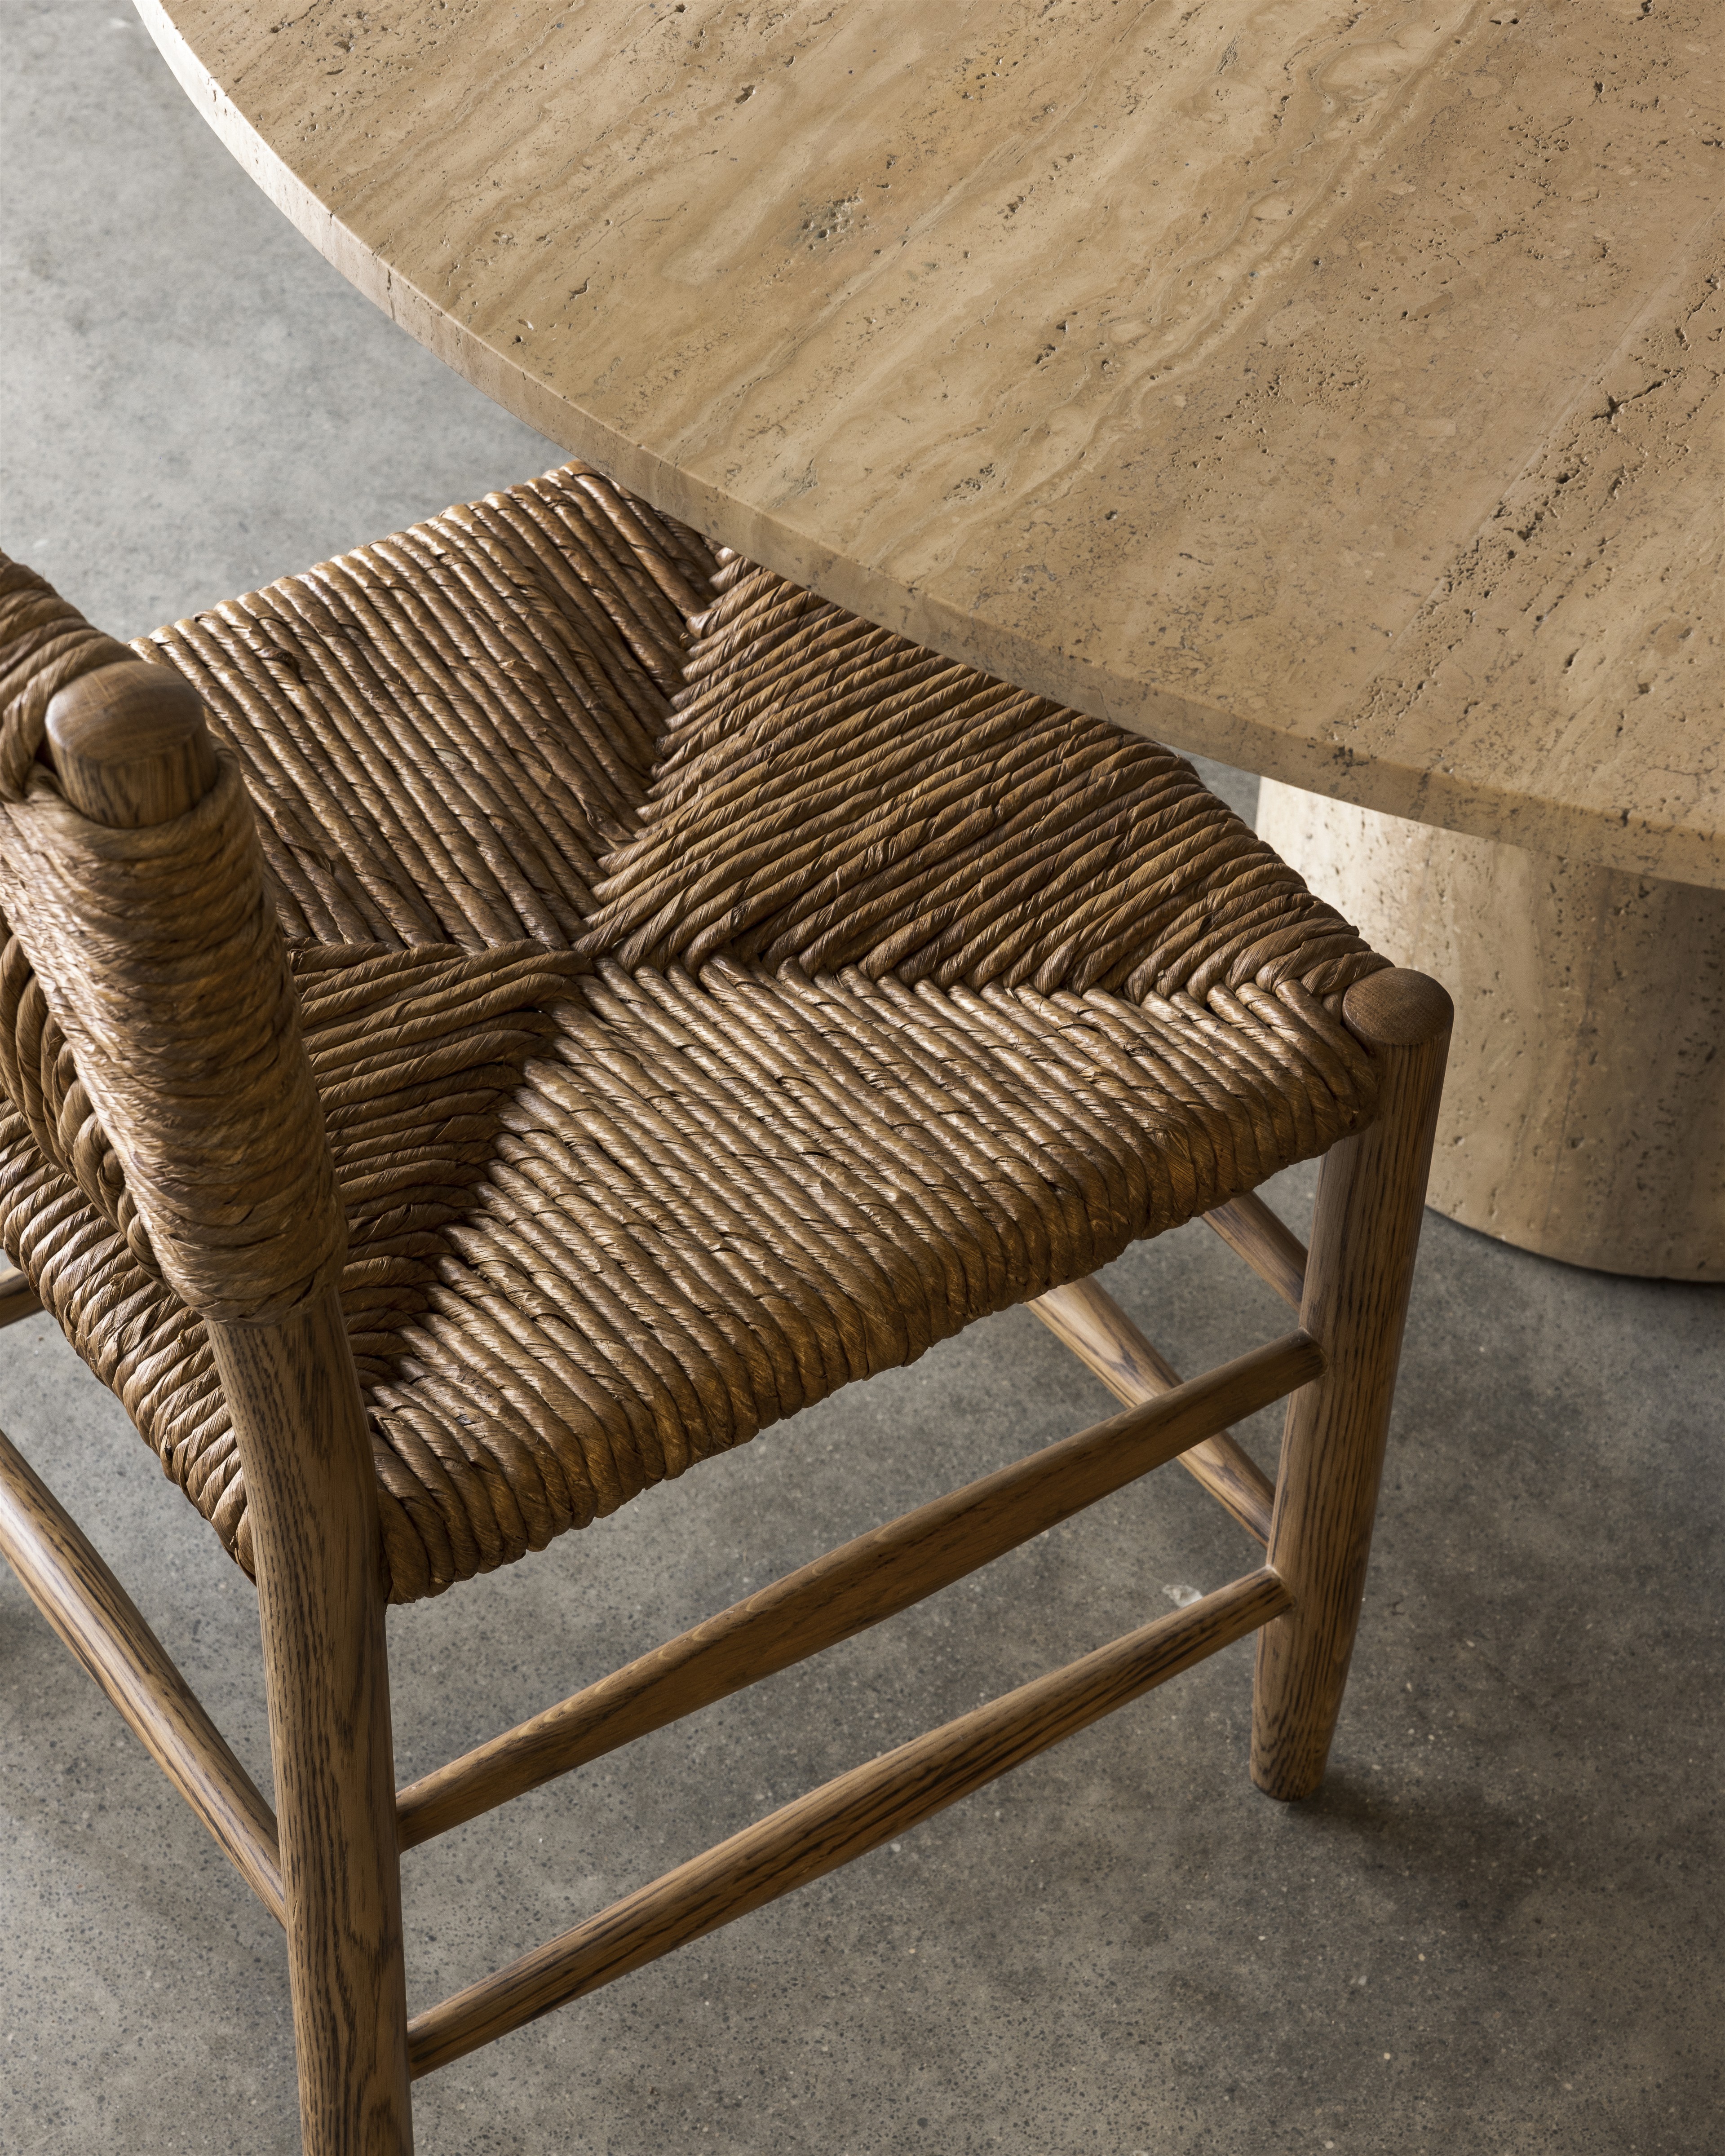 a wicker chair sitting in front of a wooden table